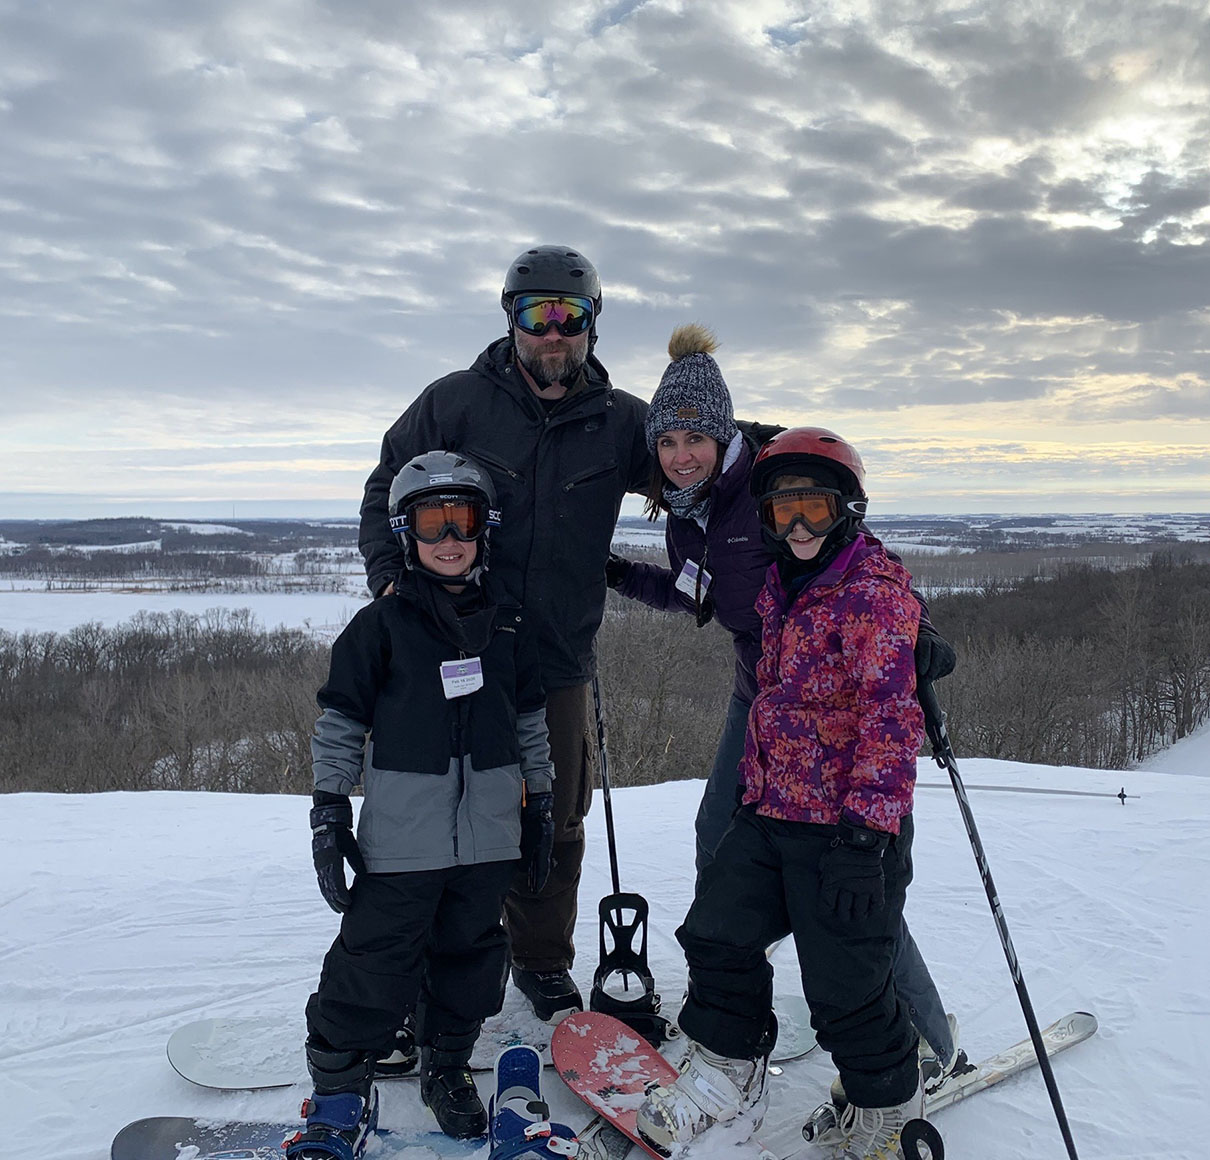 Heidi and her family skiing